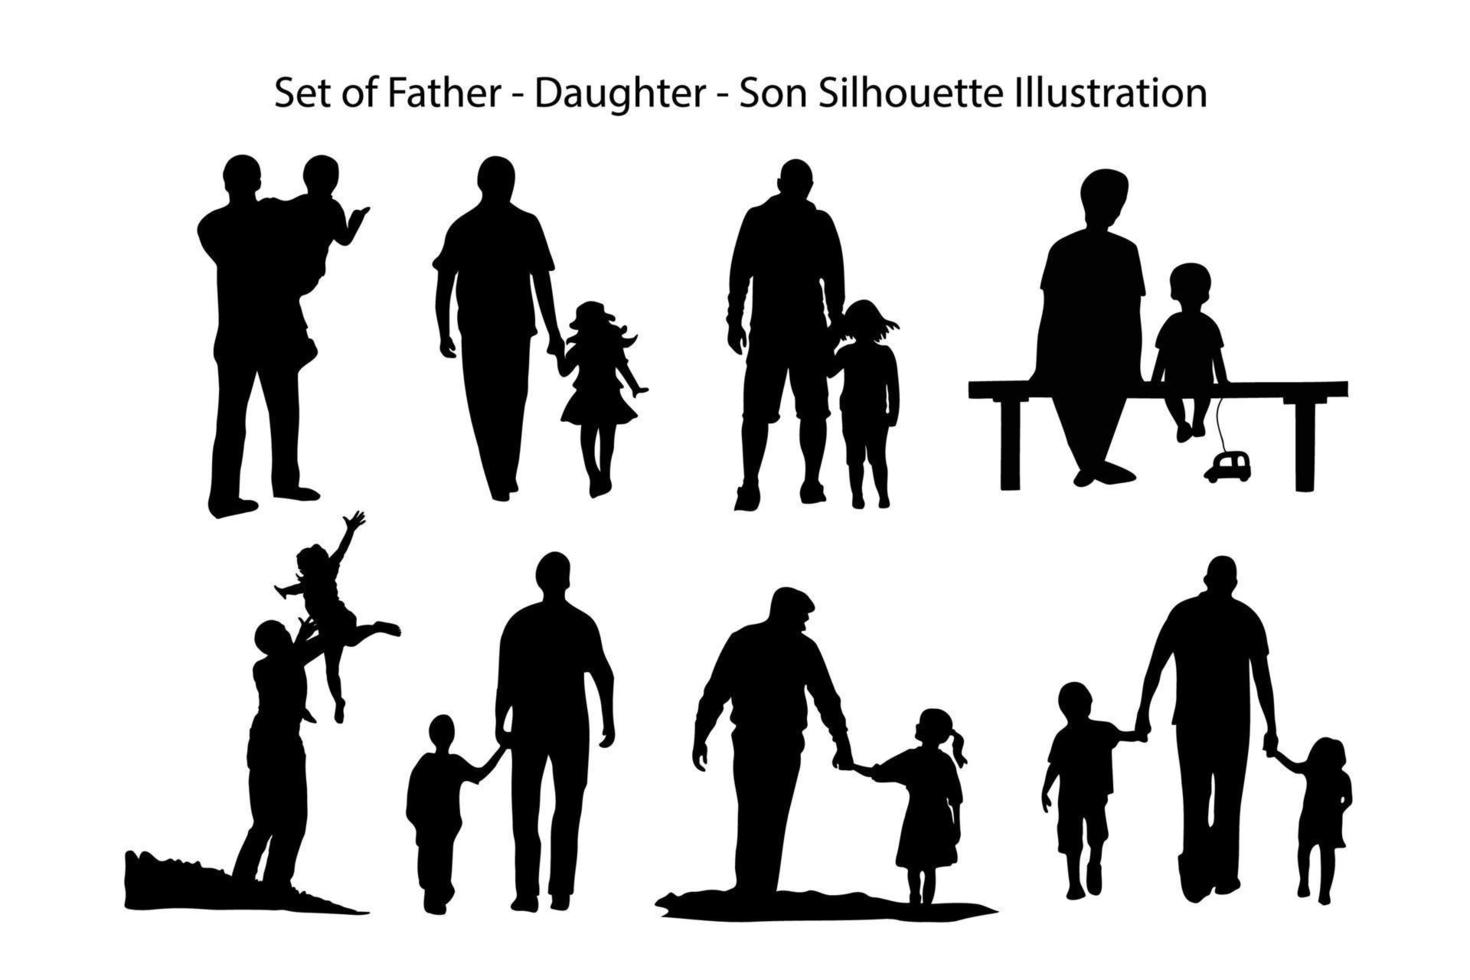 Silhouettes of a family. Father and daughter-son silhouette illustration vector